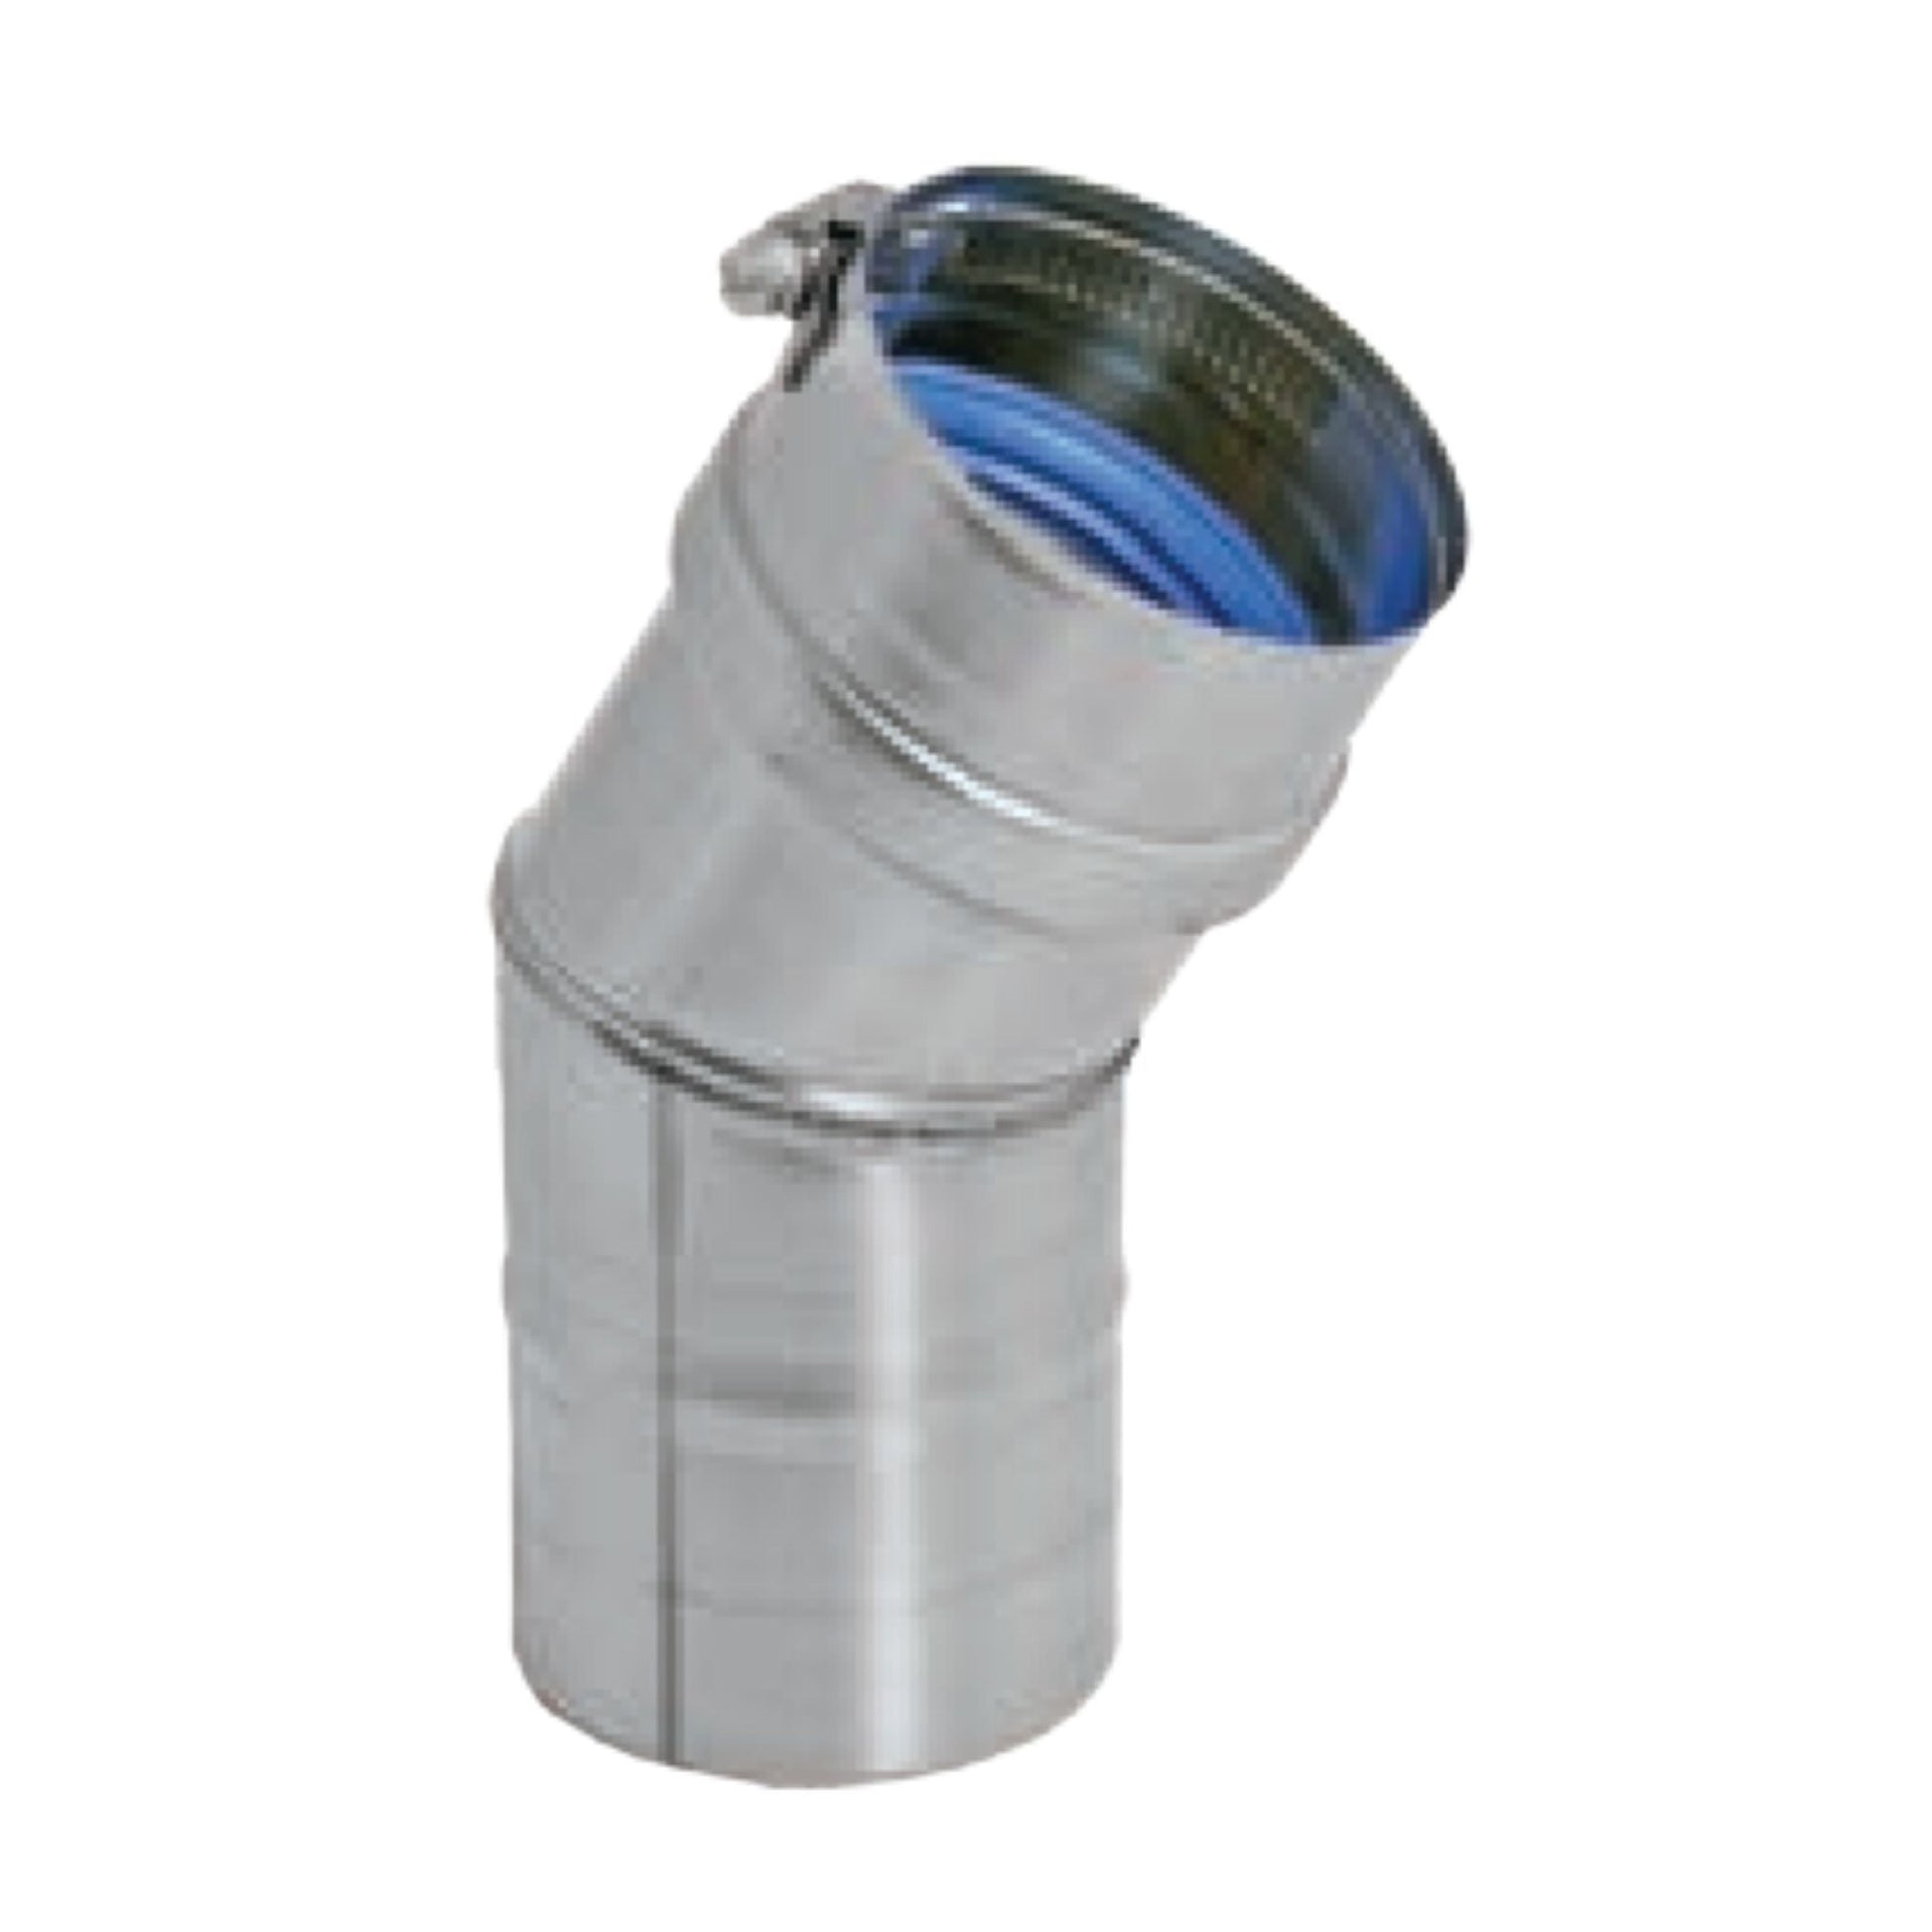 DuraVent FasNSeal 7" 30 Degree 316L Stainless Steel Elbow